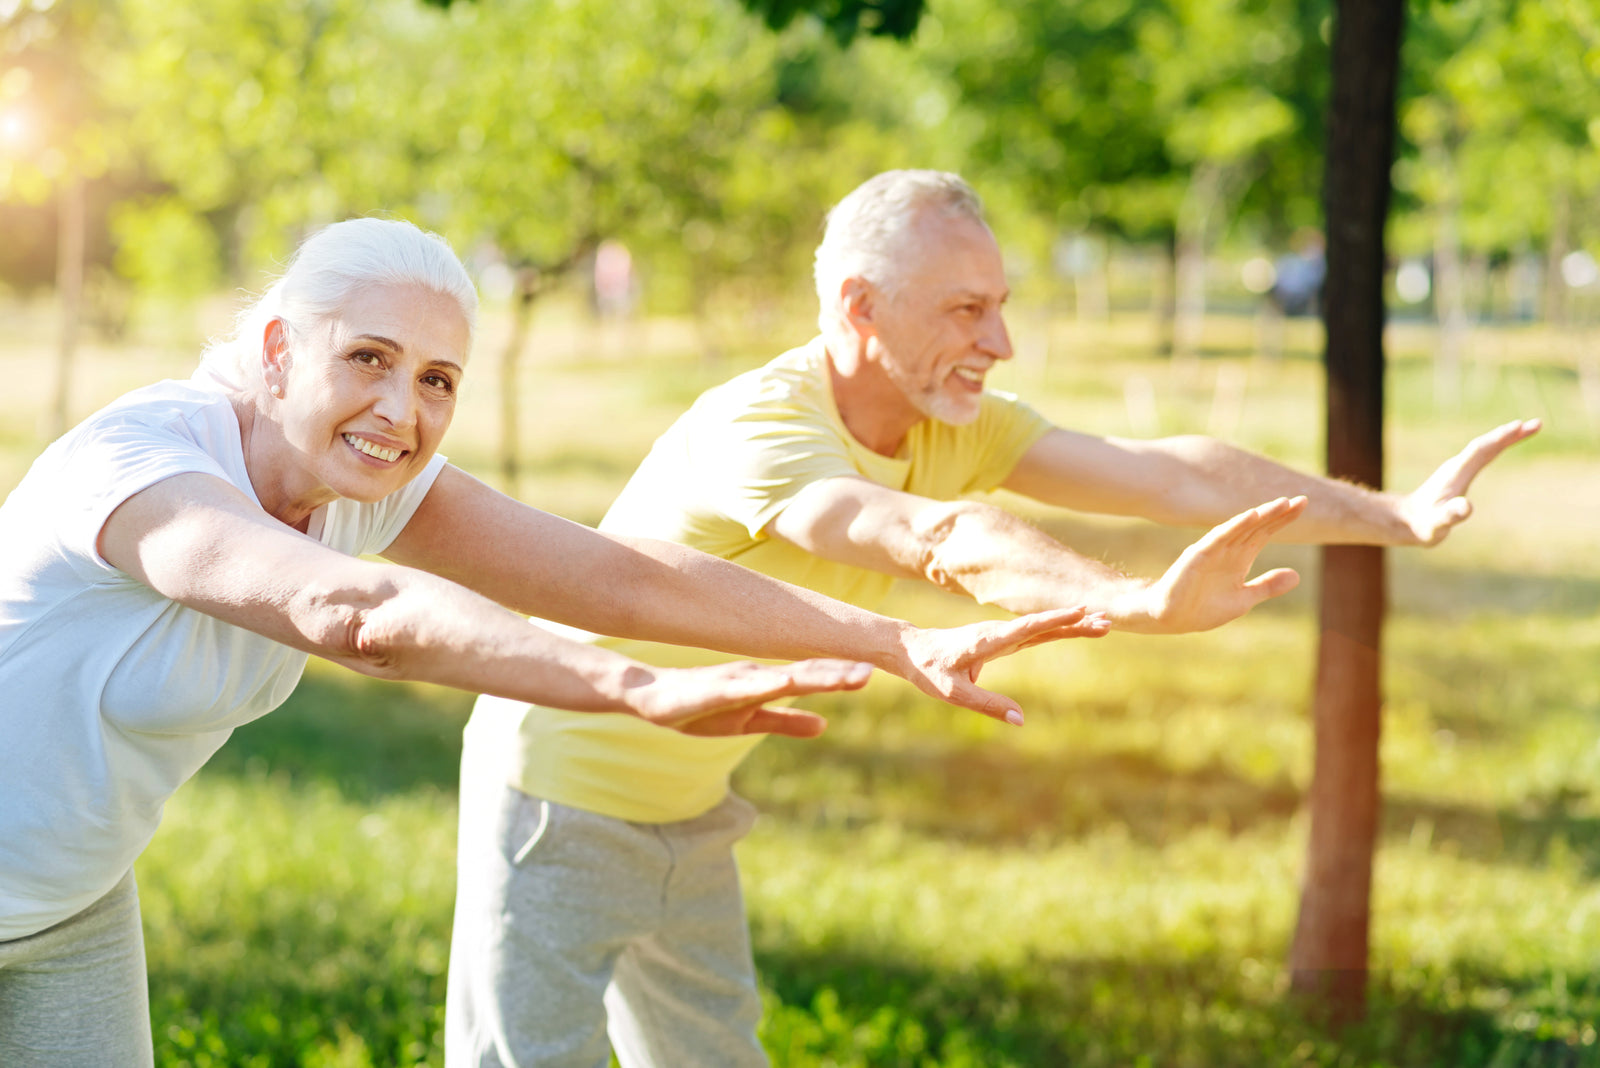 Morning workout. Senior adult couple stretching in the park